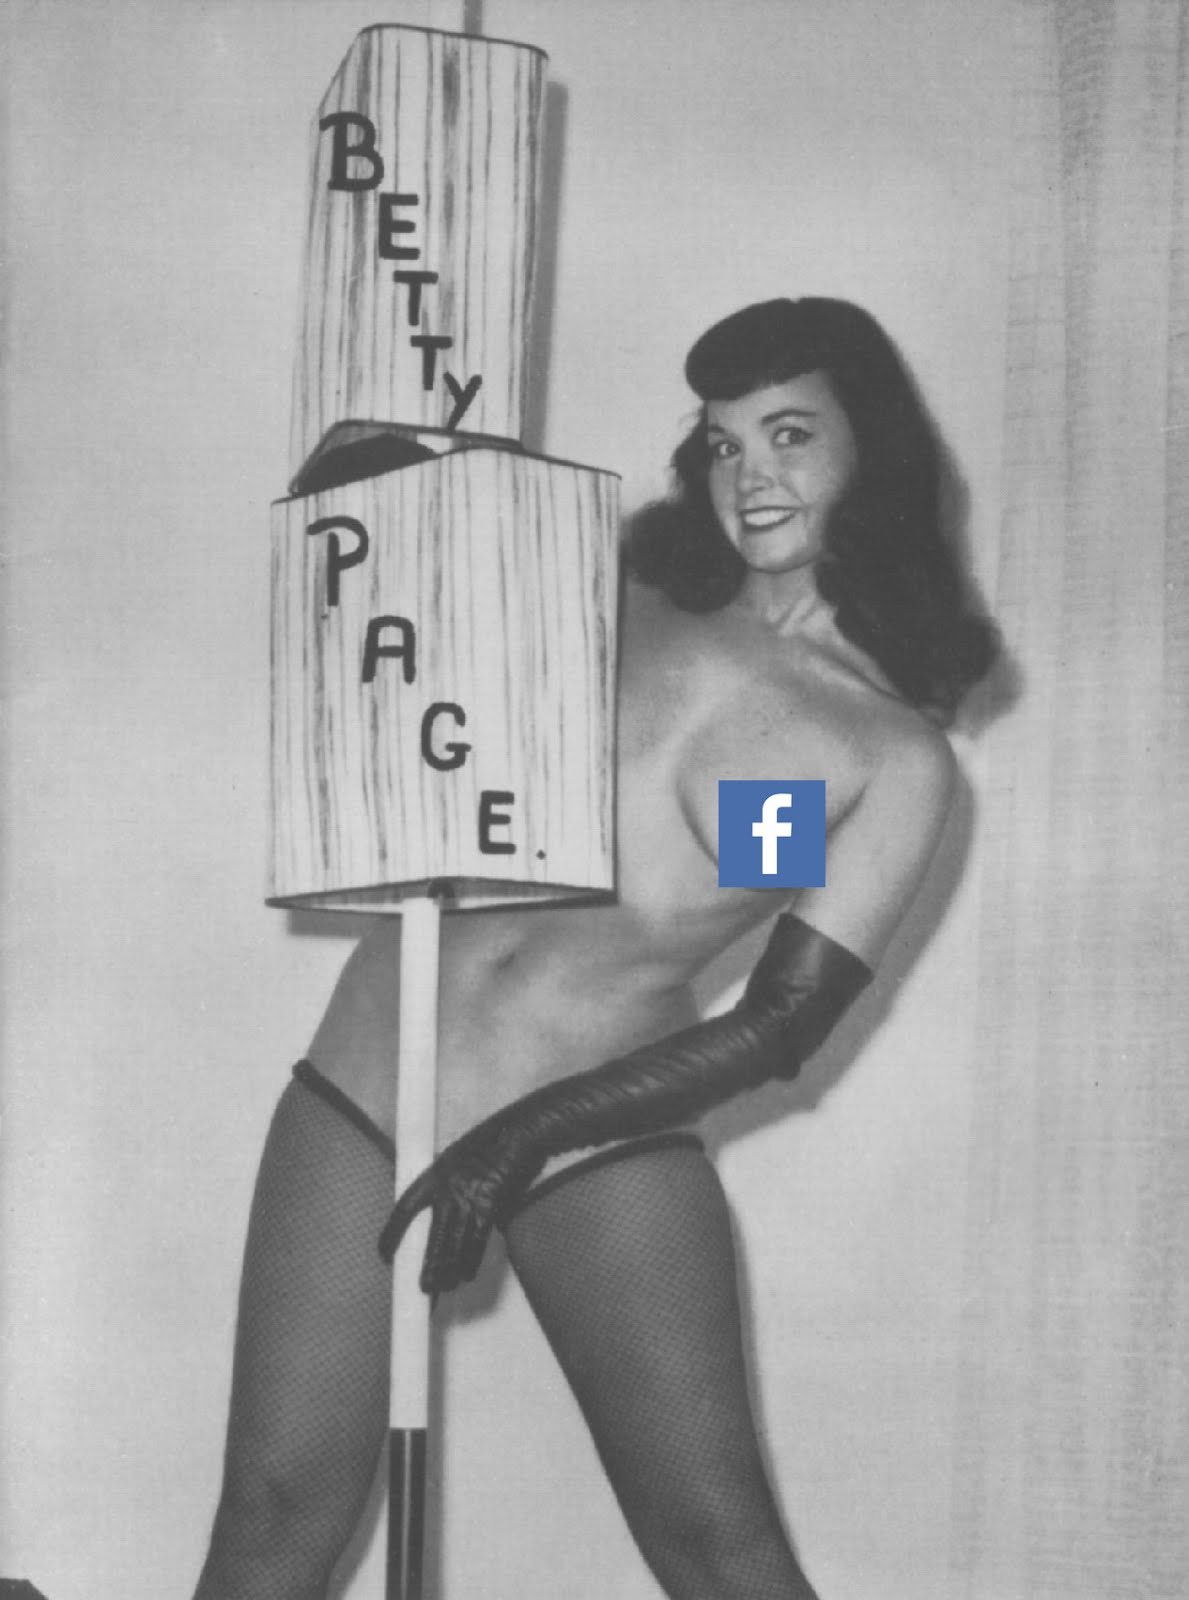 Syrtic Blog: Censored / Uncensored Bettie Page.